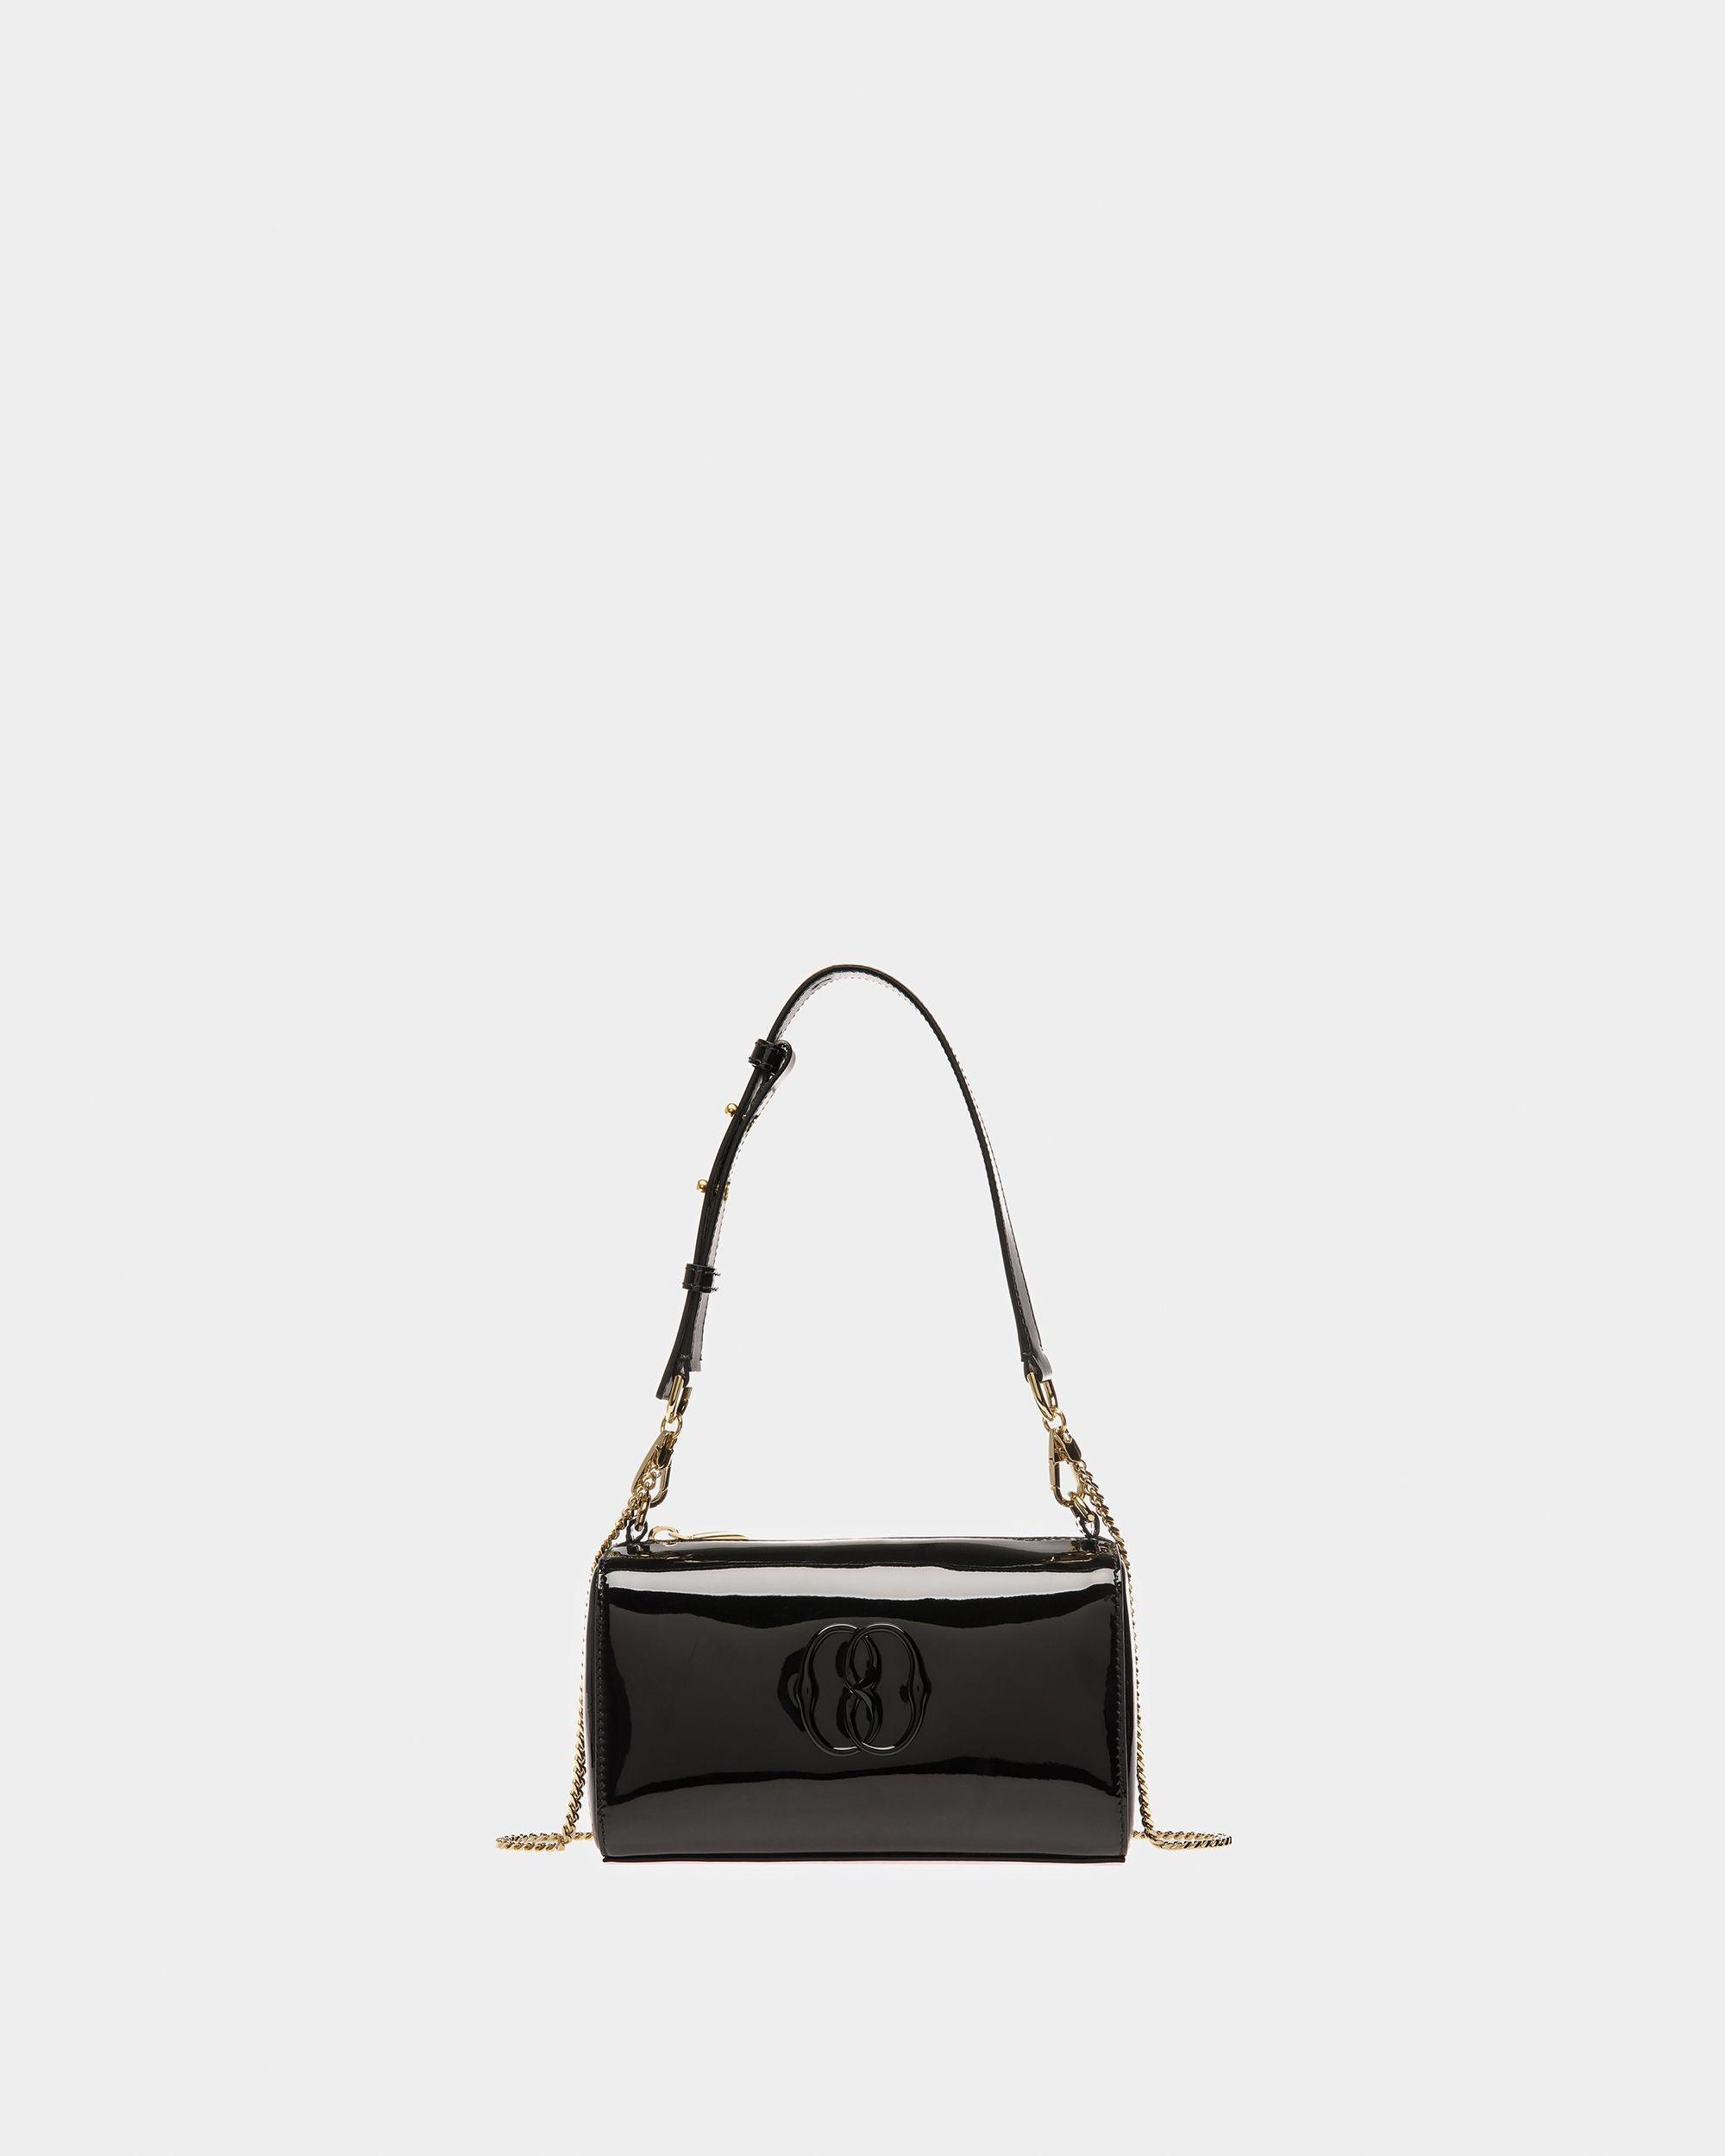 Bally Emblem Minibag In Black Leather in White | Lyst